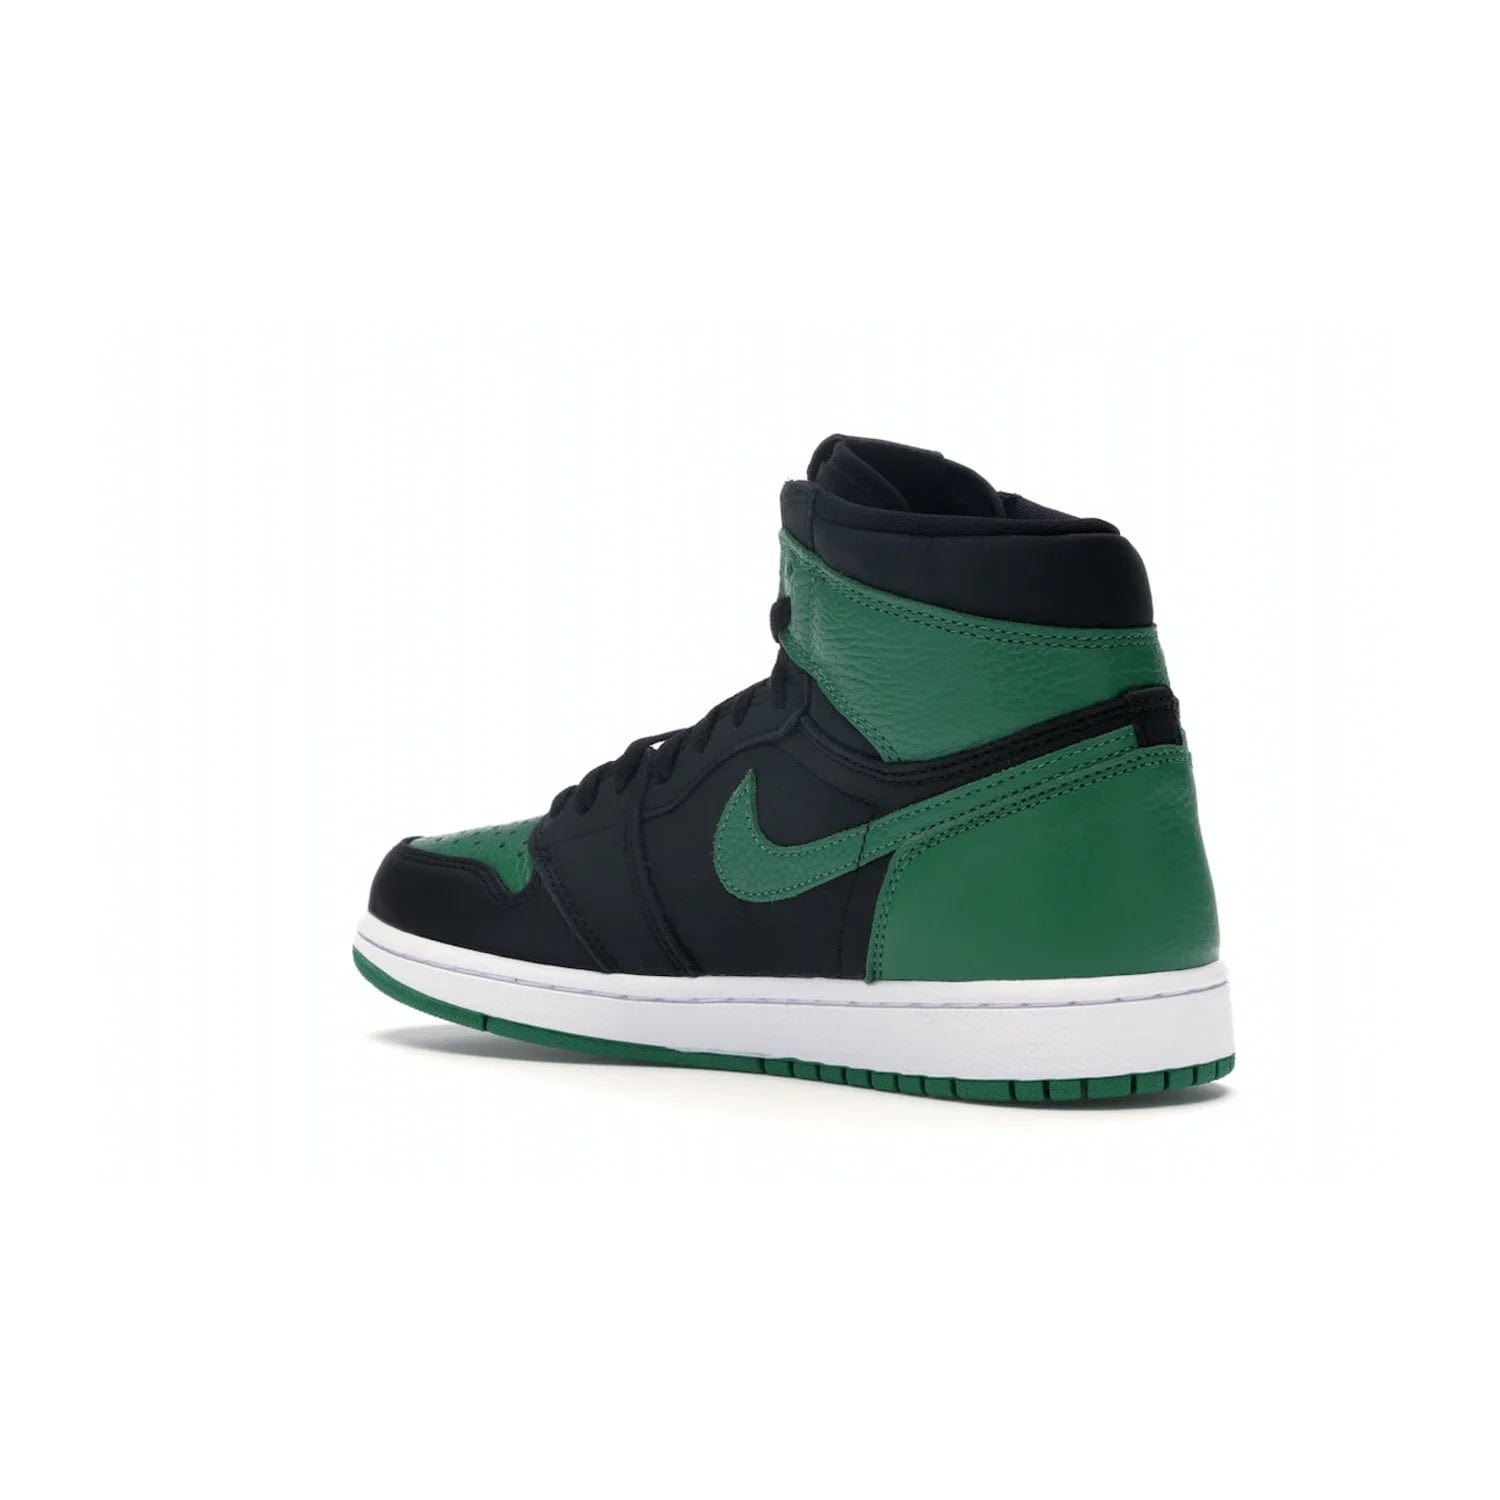 Jordan 1 Retro High Pine Green Black - Image 23 - Only at www.BallersClubKickz.com - Step into fresh style with the Jordan 1 Retro High Pine Green Black. Combining a black tumbled leather upper with green leather overlays, this sneaker features a Gym Red embroidered tongue tag, sail midsole, and pine green outsole for iconic style with a unique twist.